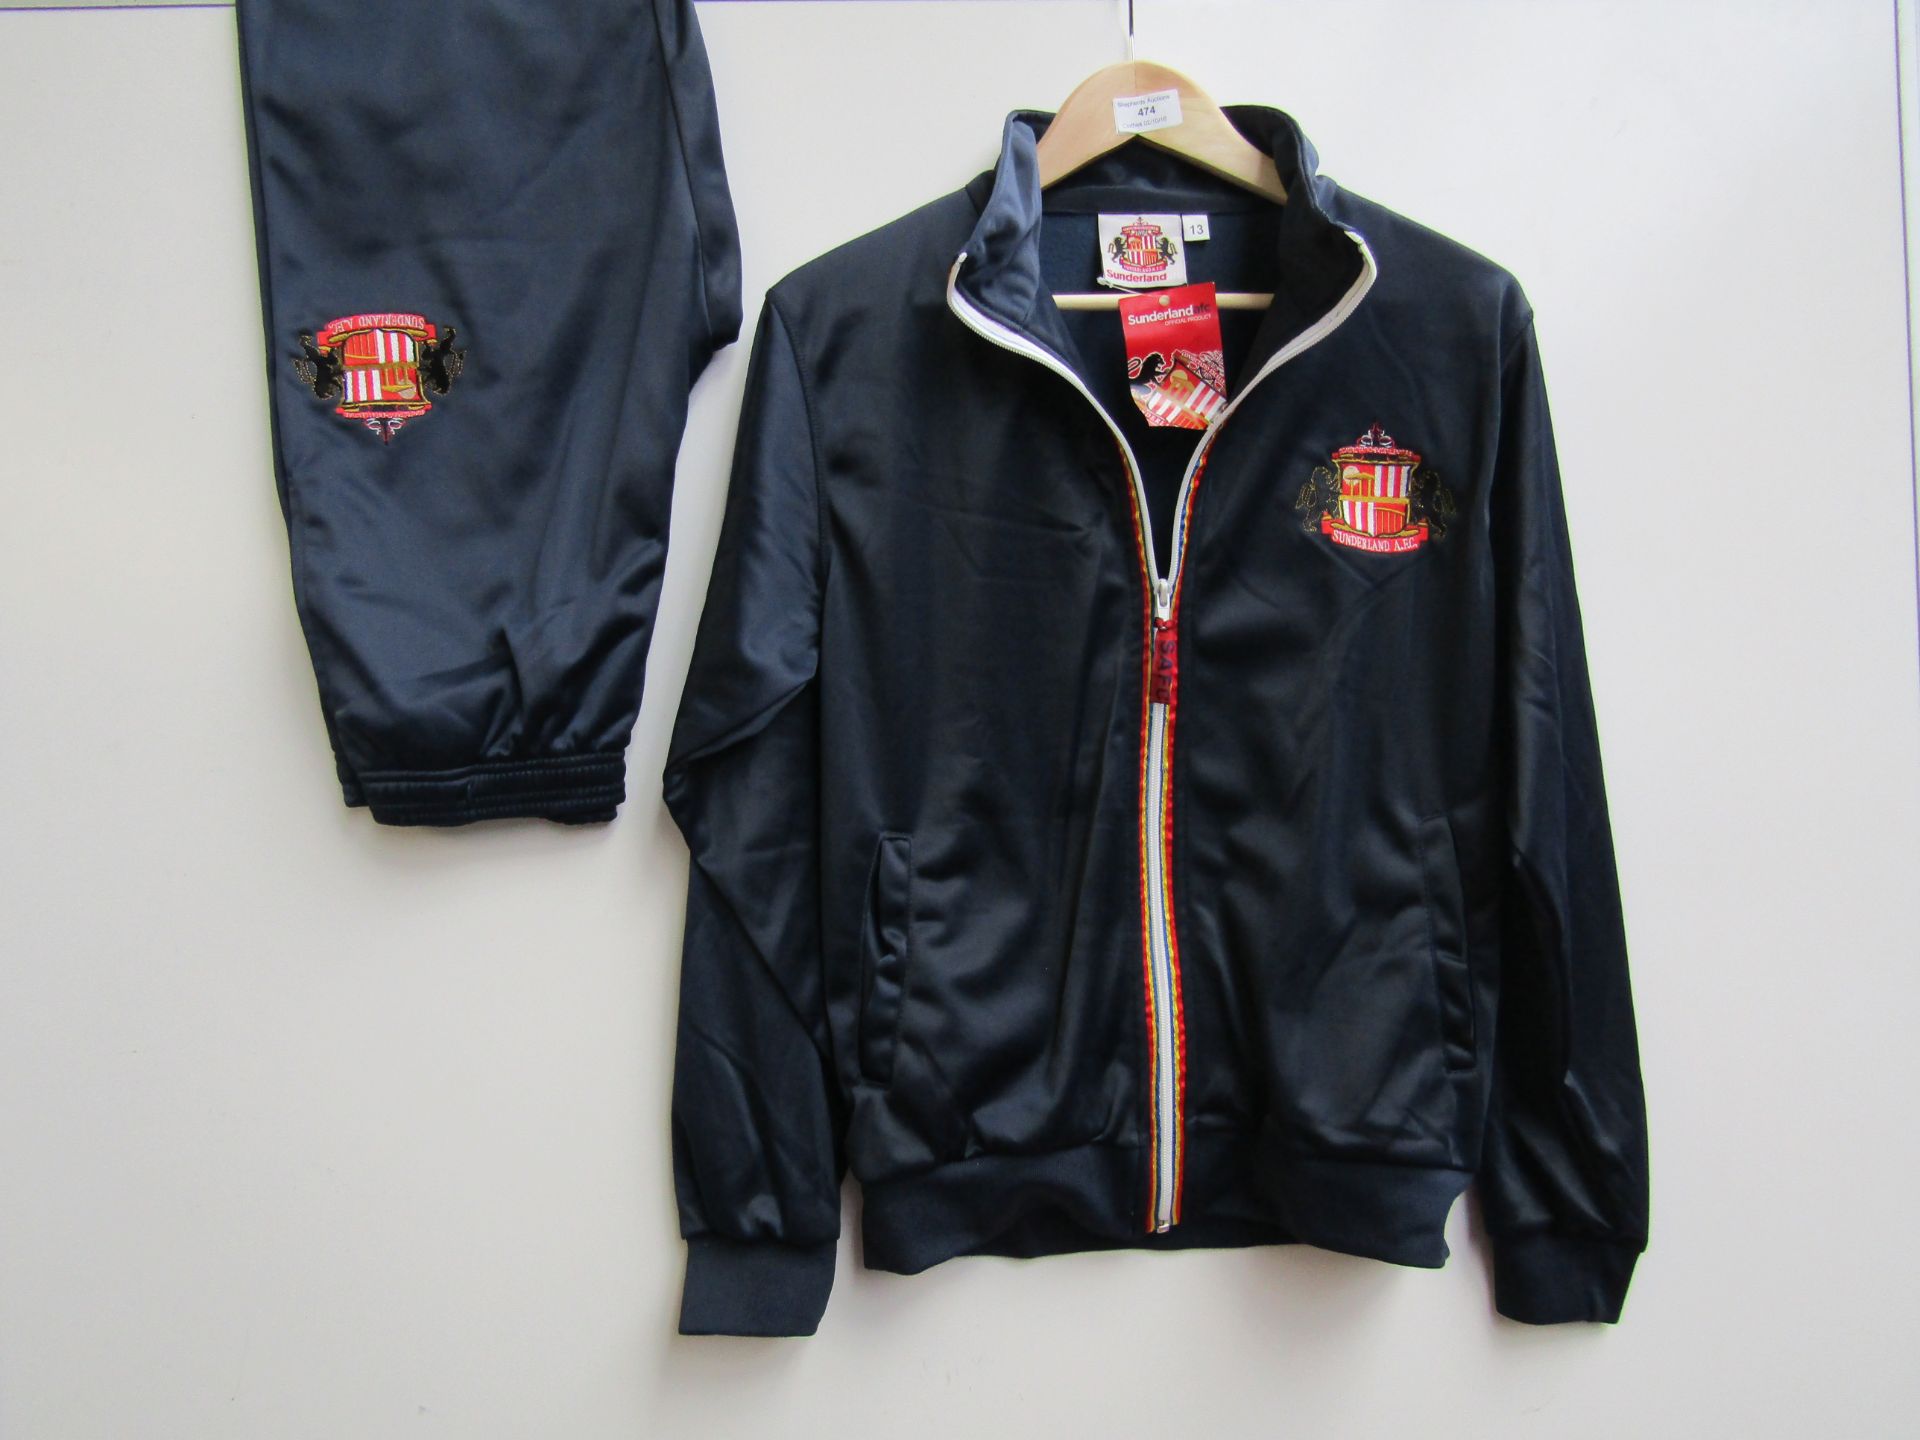 Sunderland Track Suit (jacket and Bottoms), new age 13/14